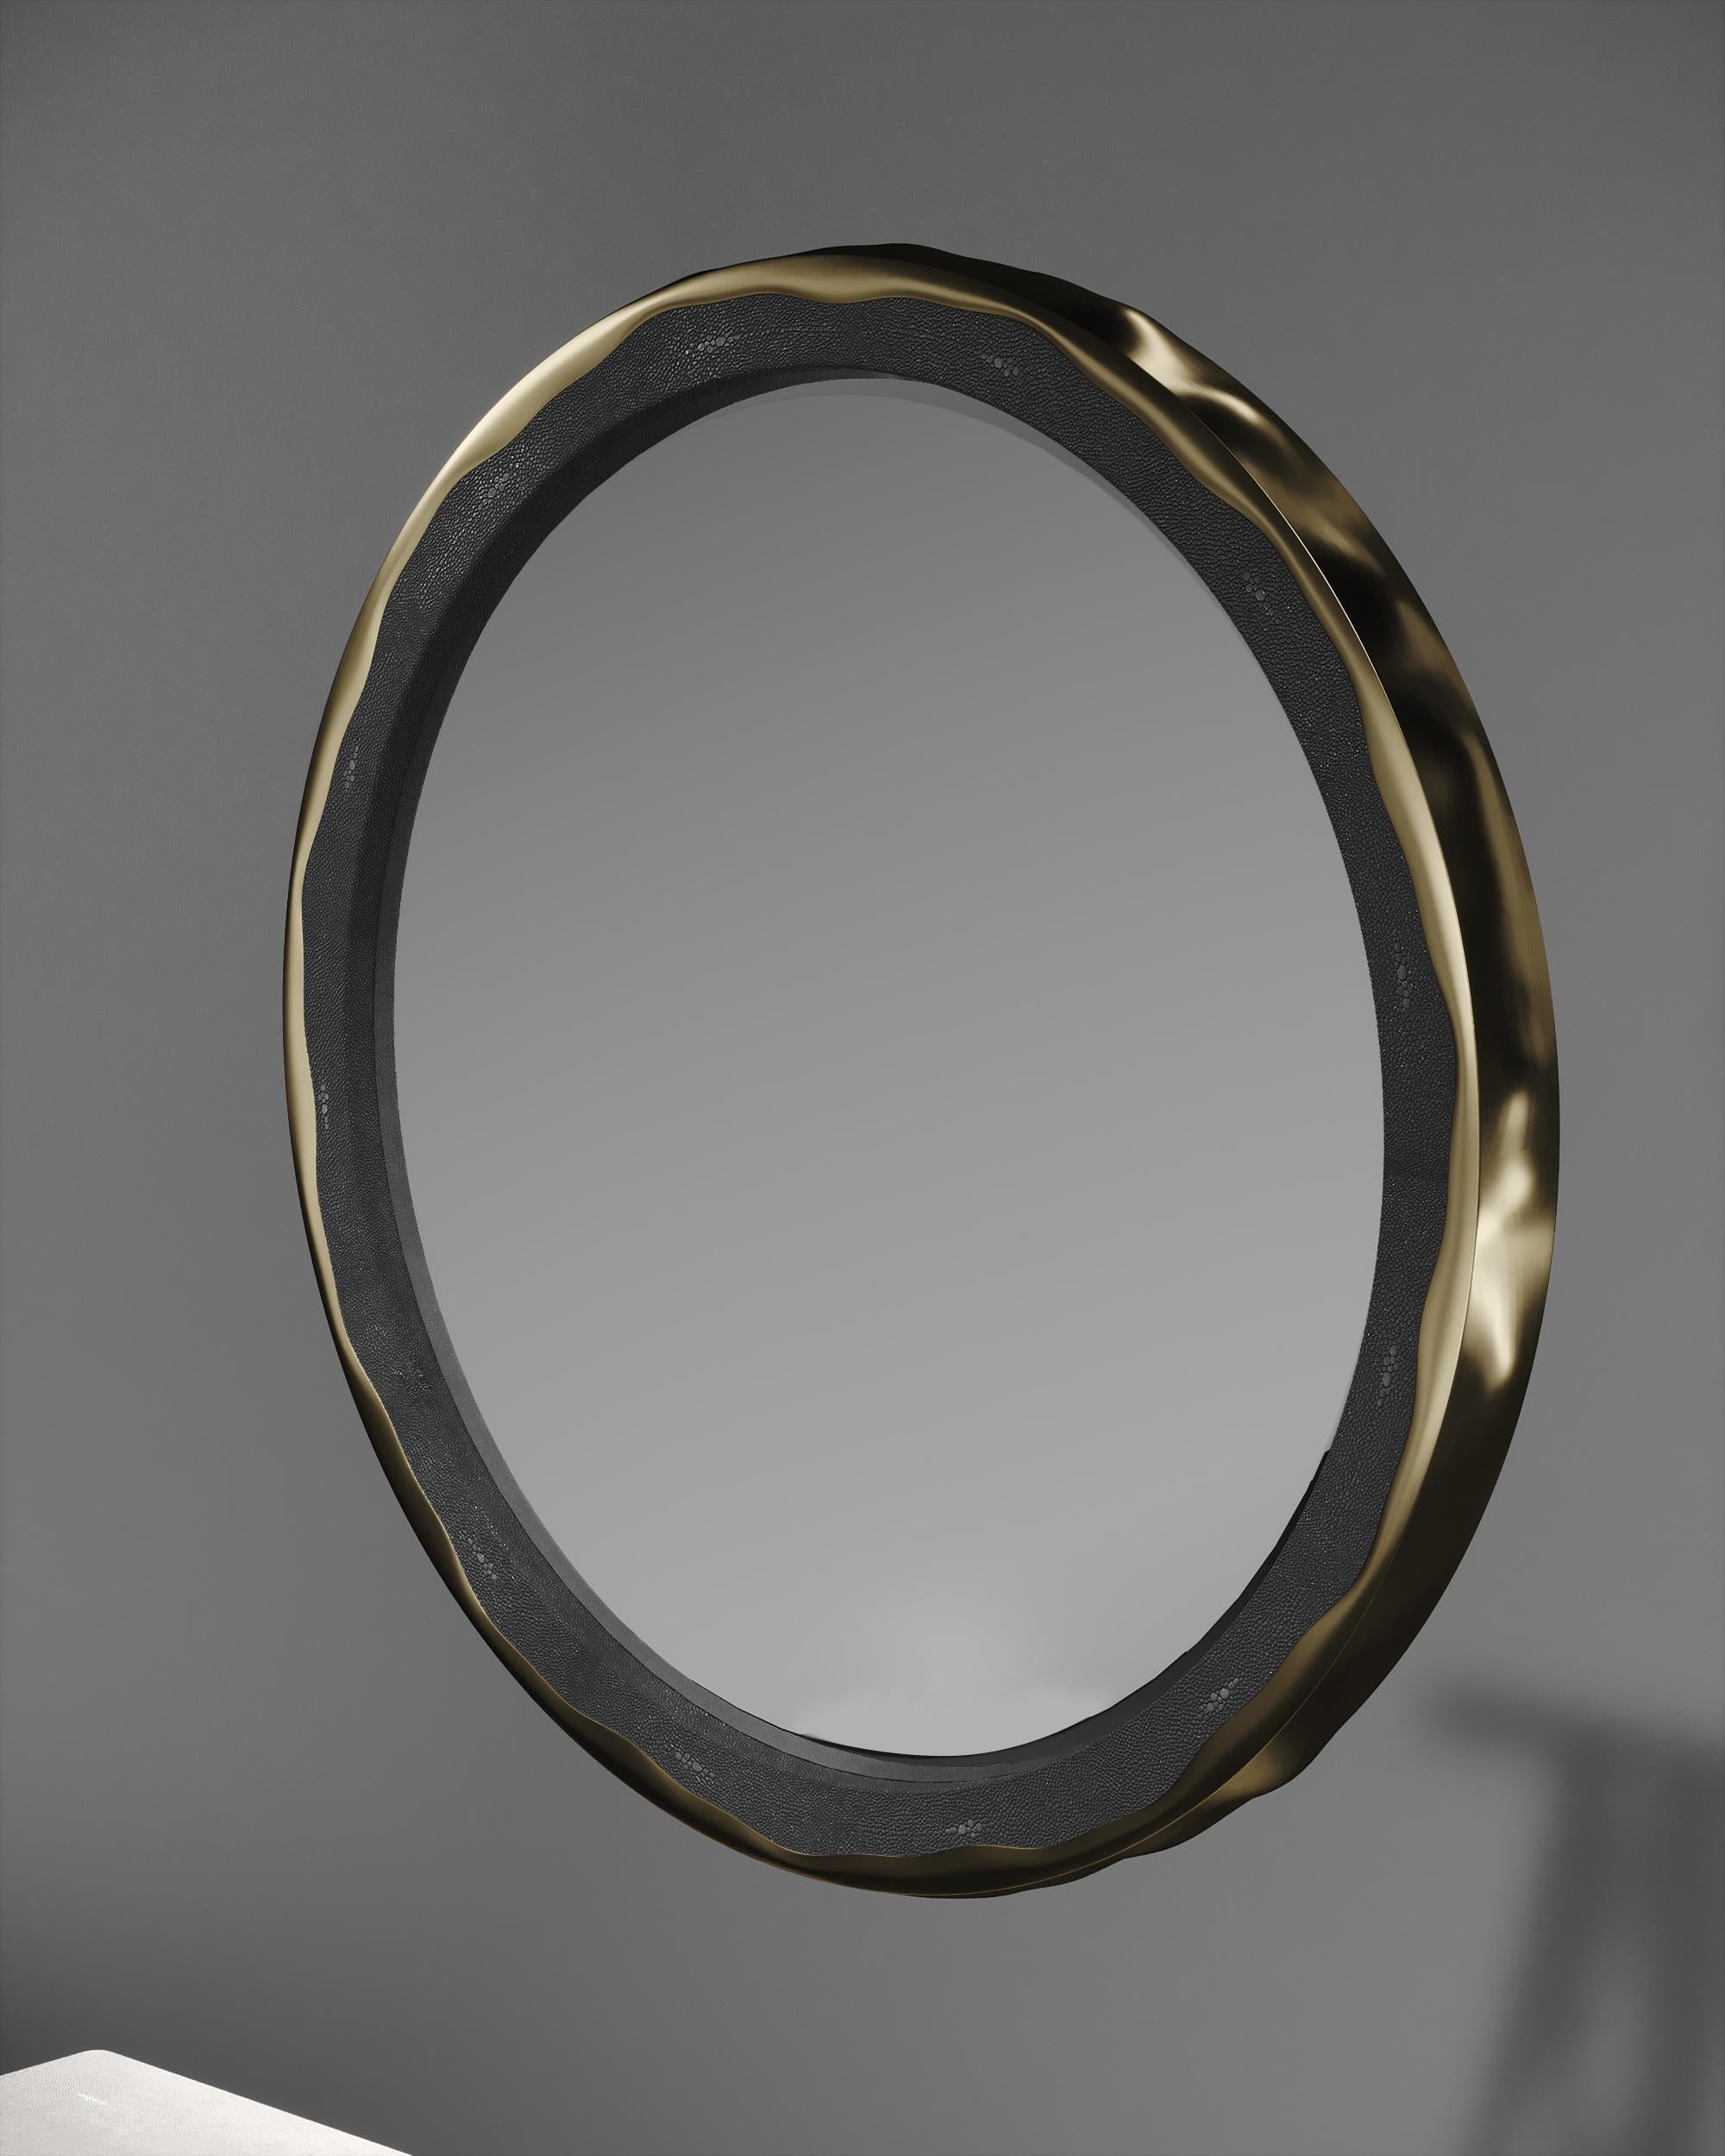 The Melting mirror by R&Y Augousti in coal black shagreen and bronze-patina brass, is an iconic piece of theirs with their signature 